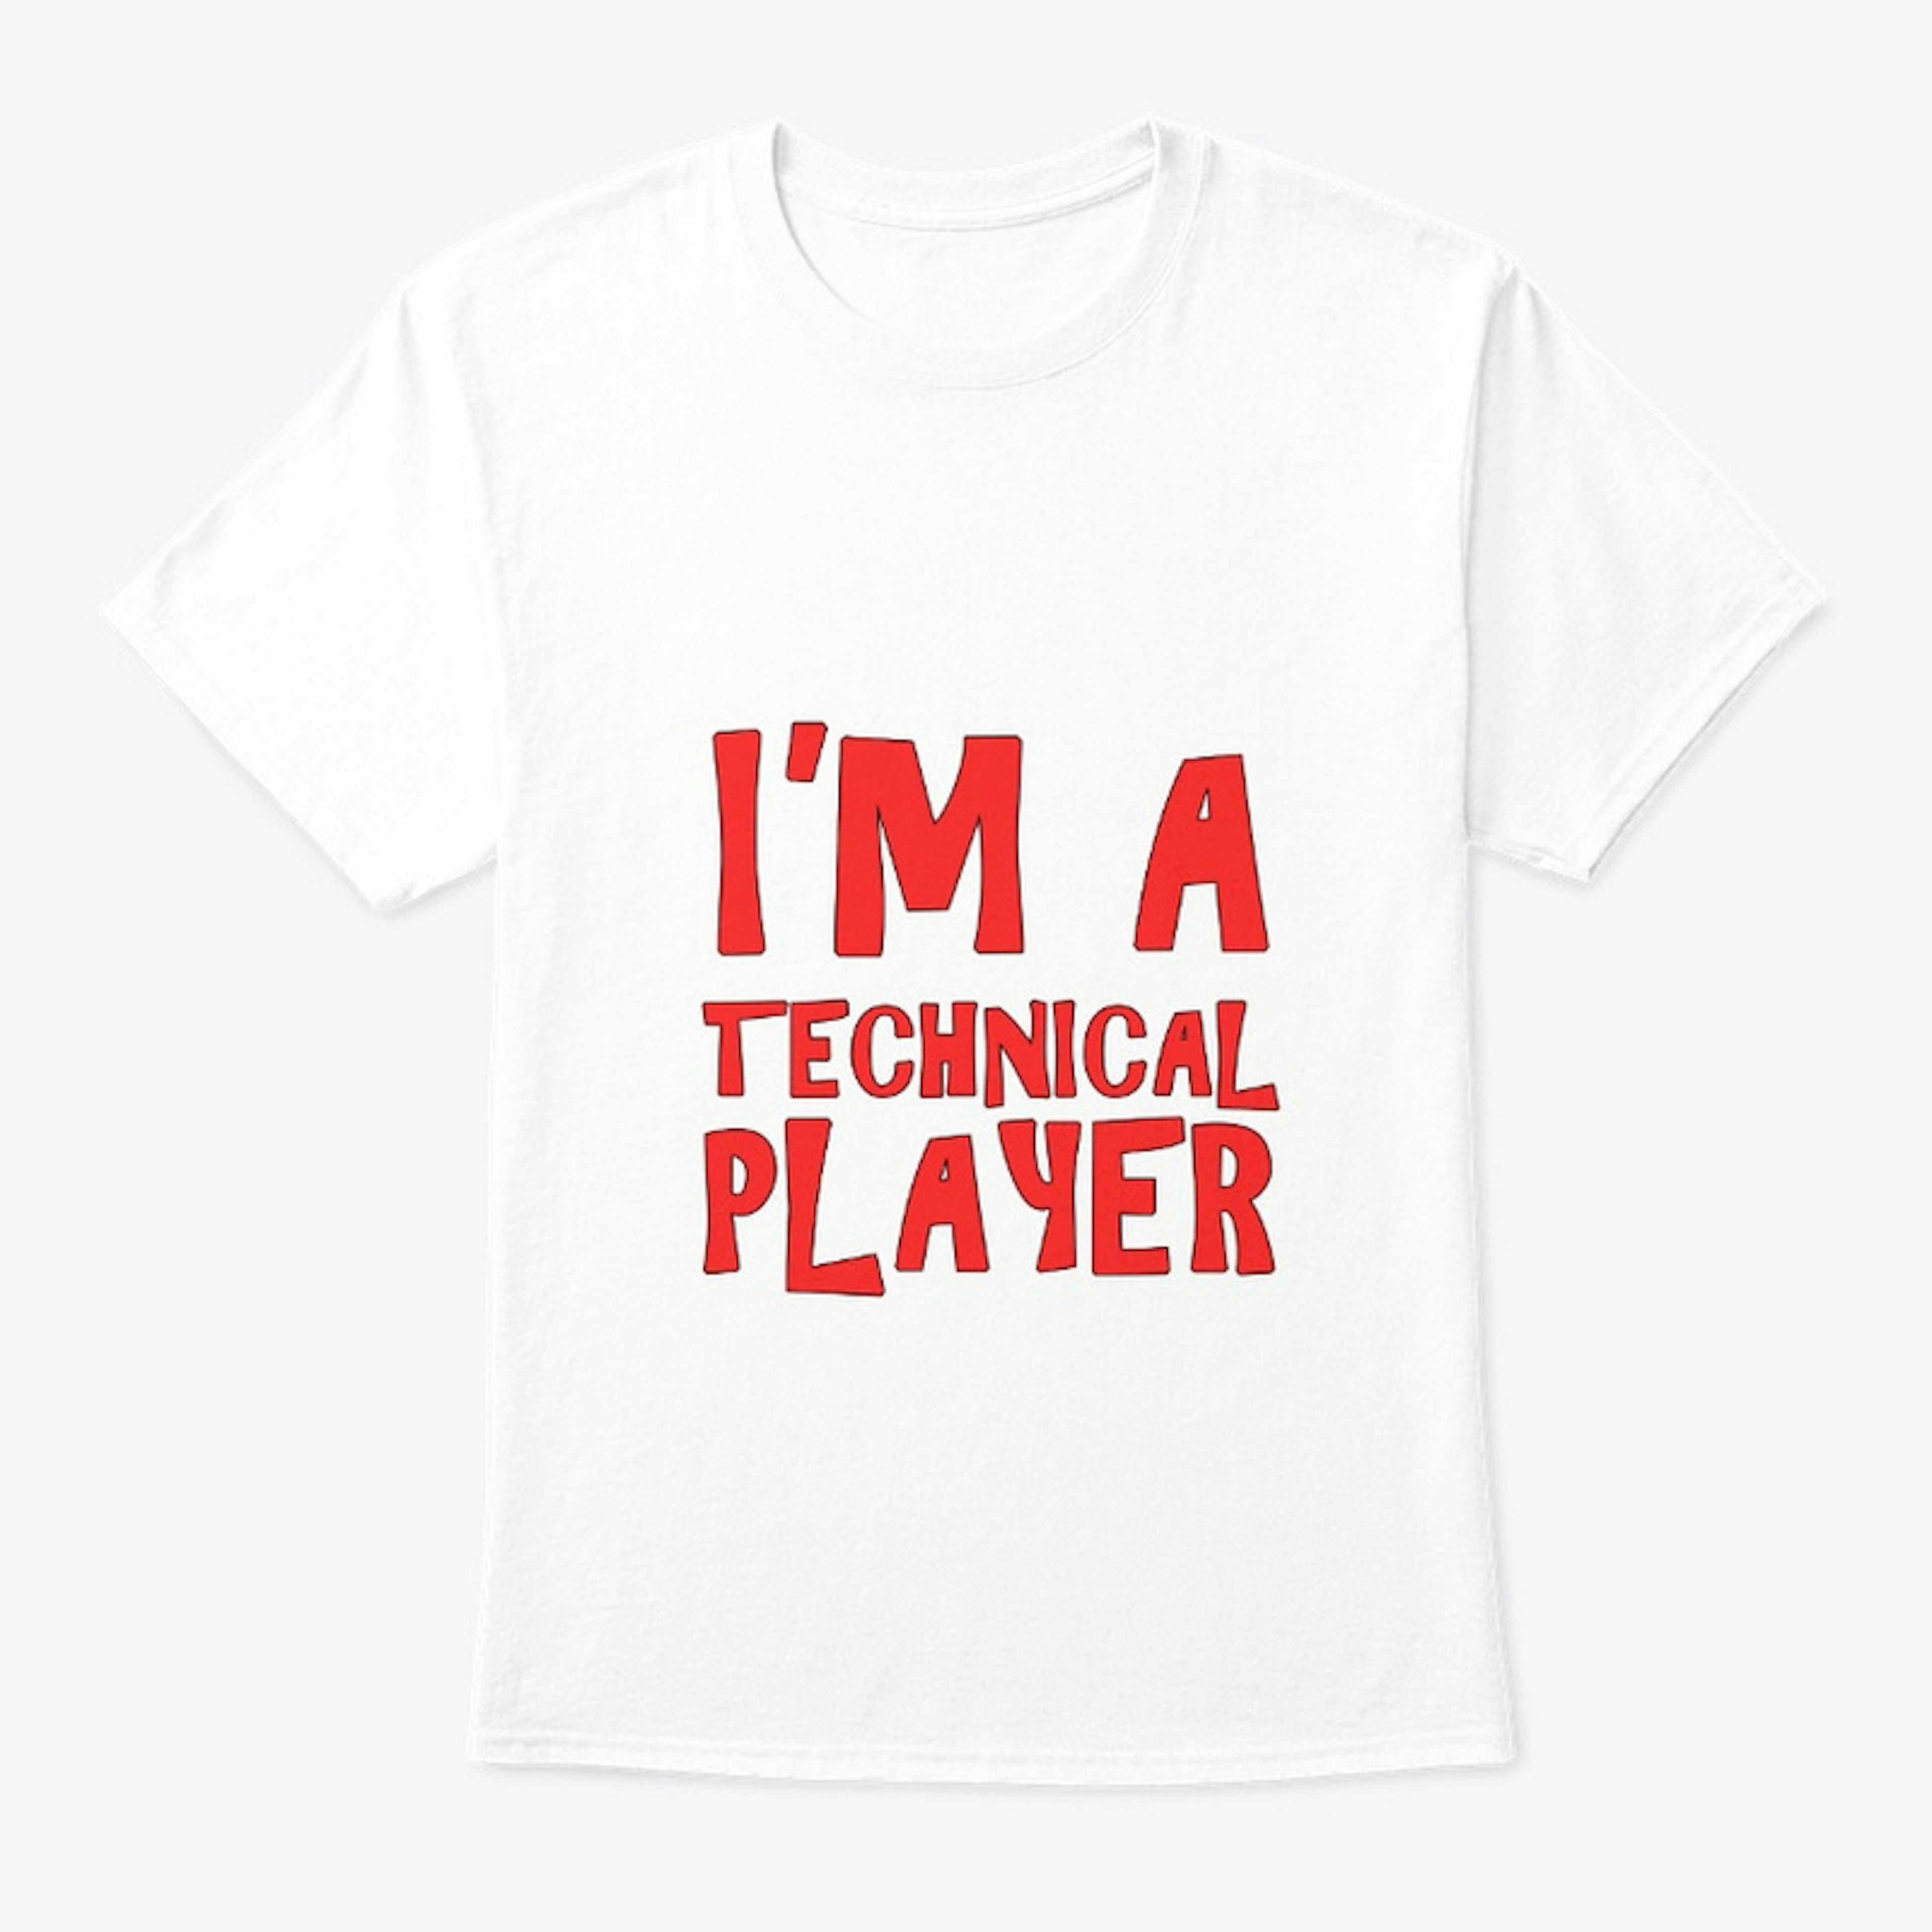 I'm a Technical Player